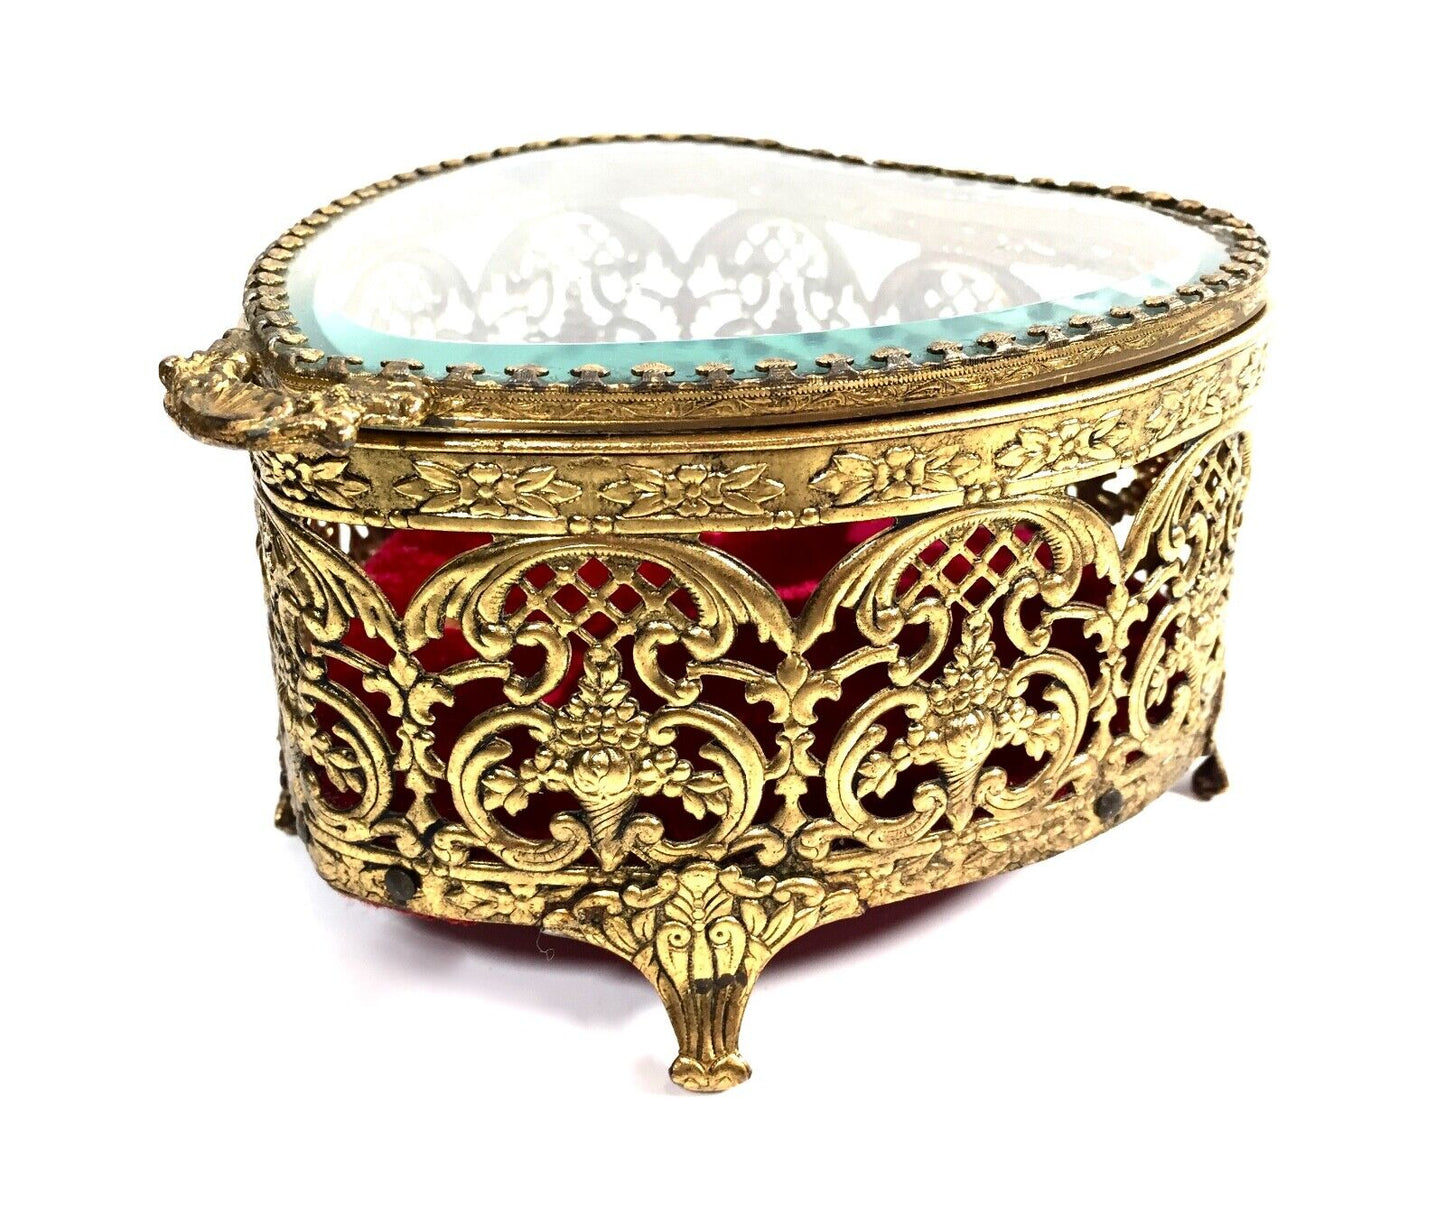 Antique Gilt Metal Jewellery Box / Casket Heart Shaped with Glass Top / c1900